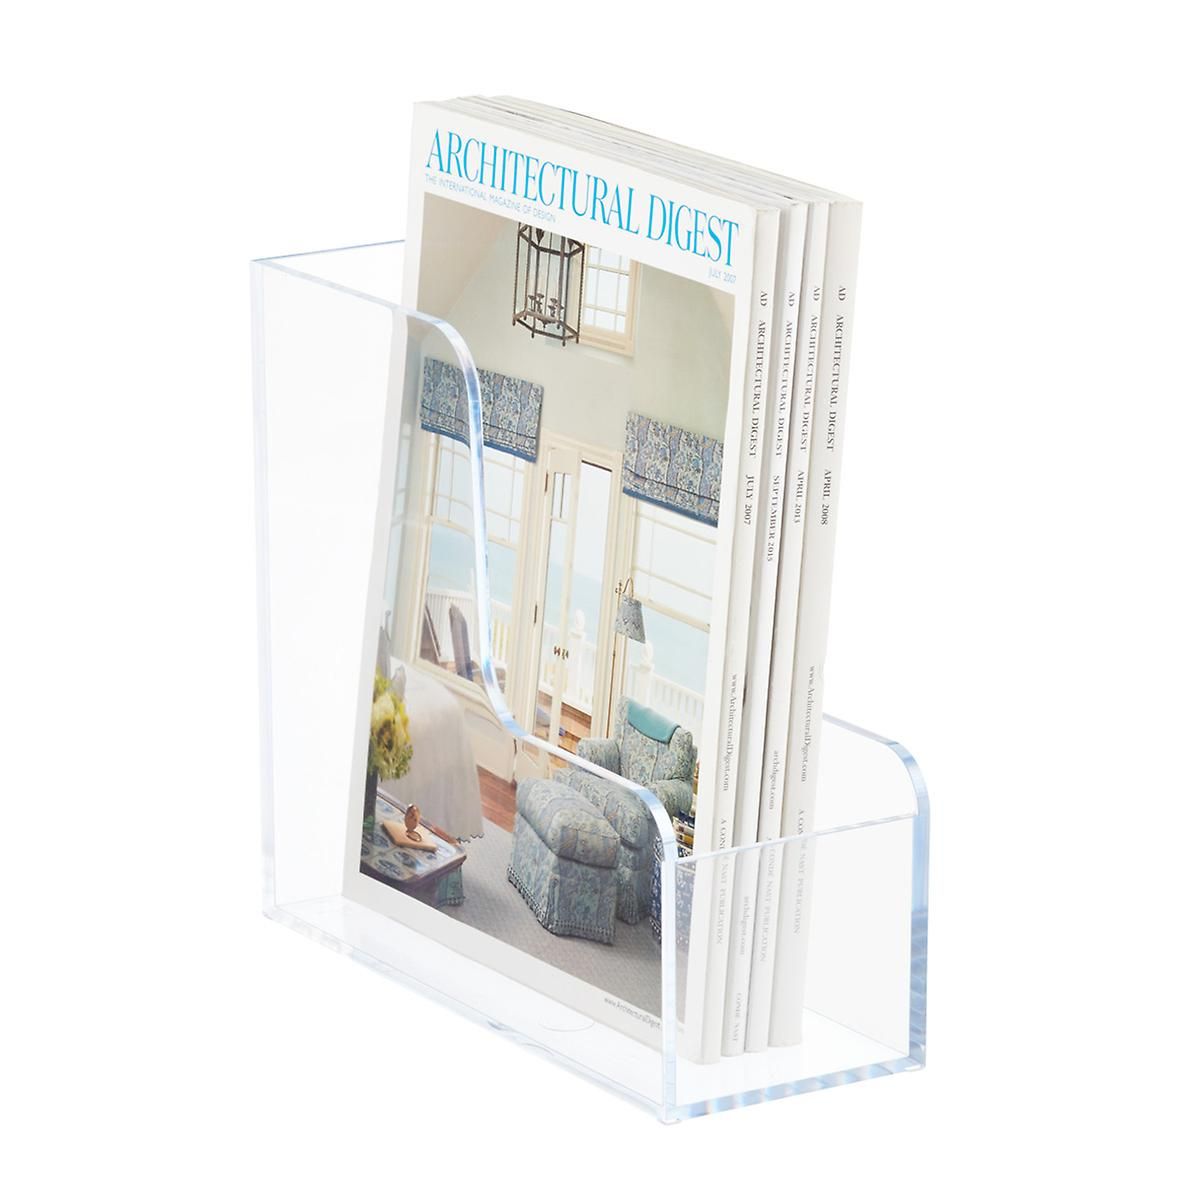 Palaset Clear Magazine Holder | The Container Store